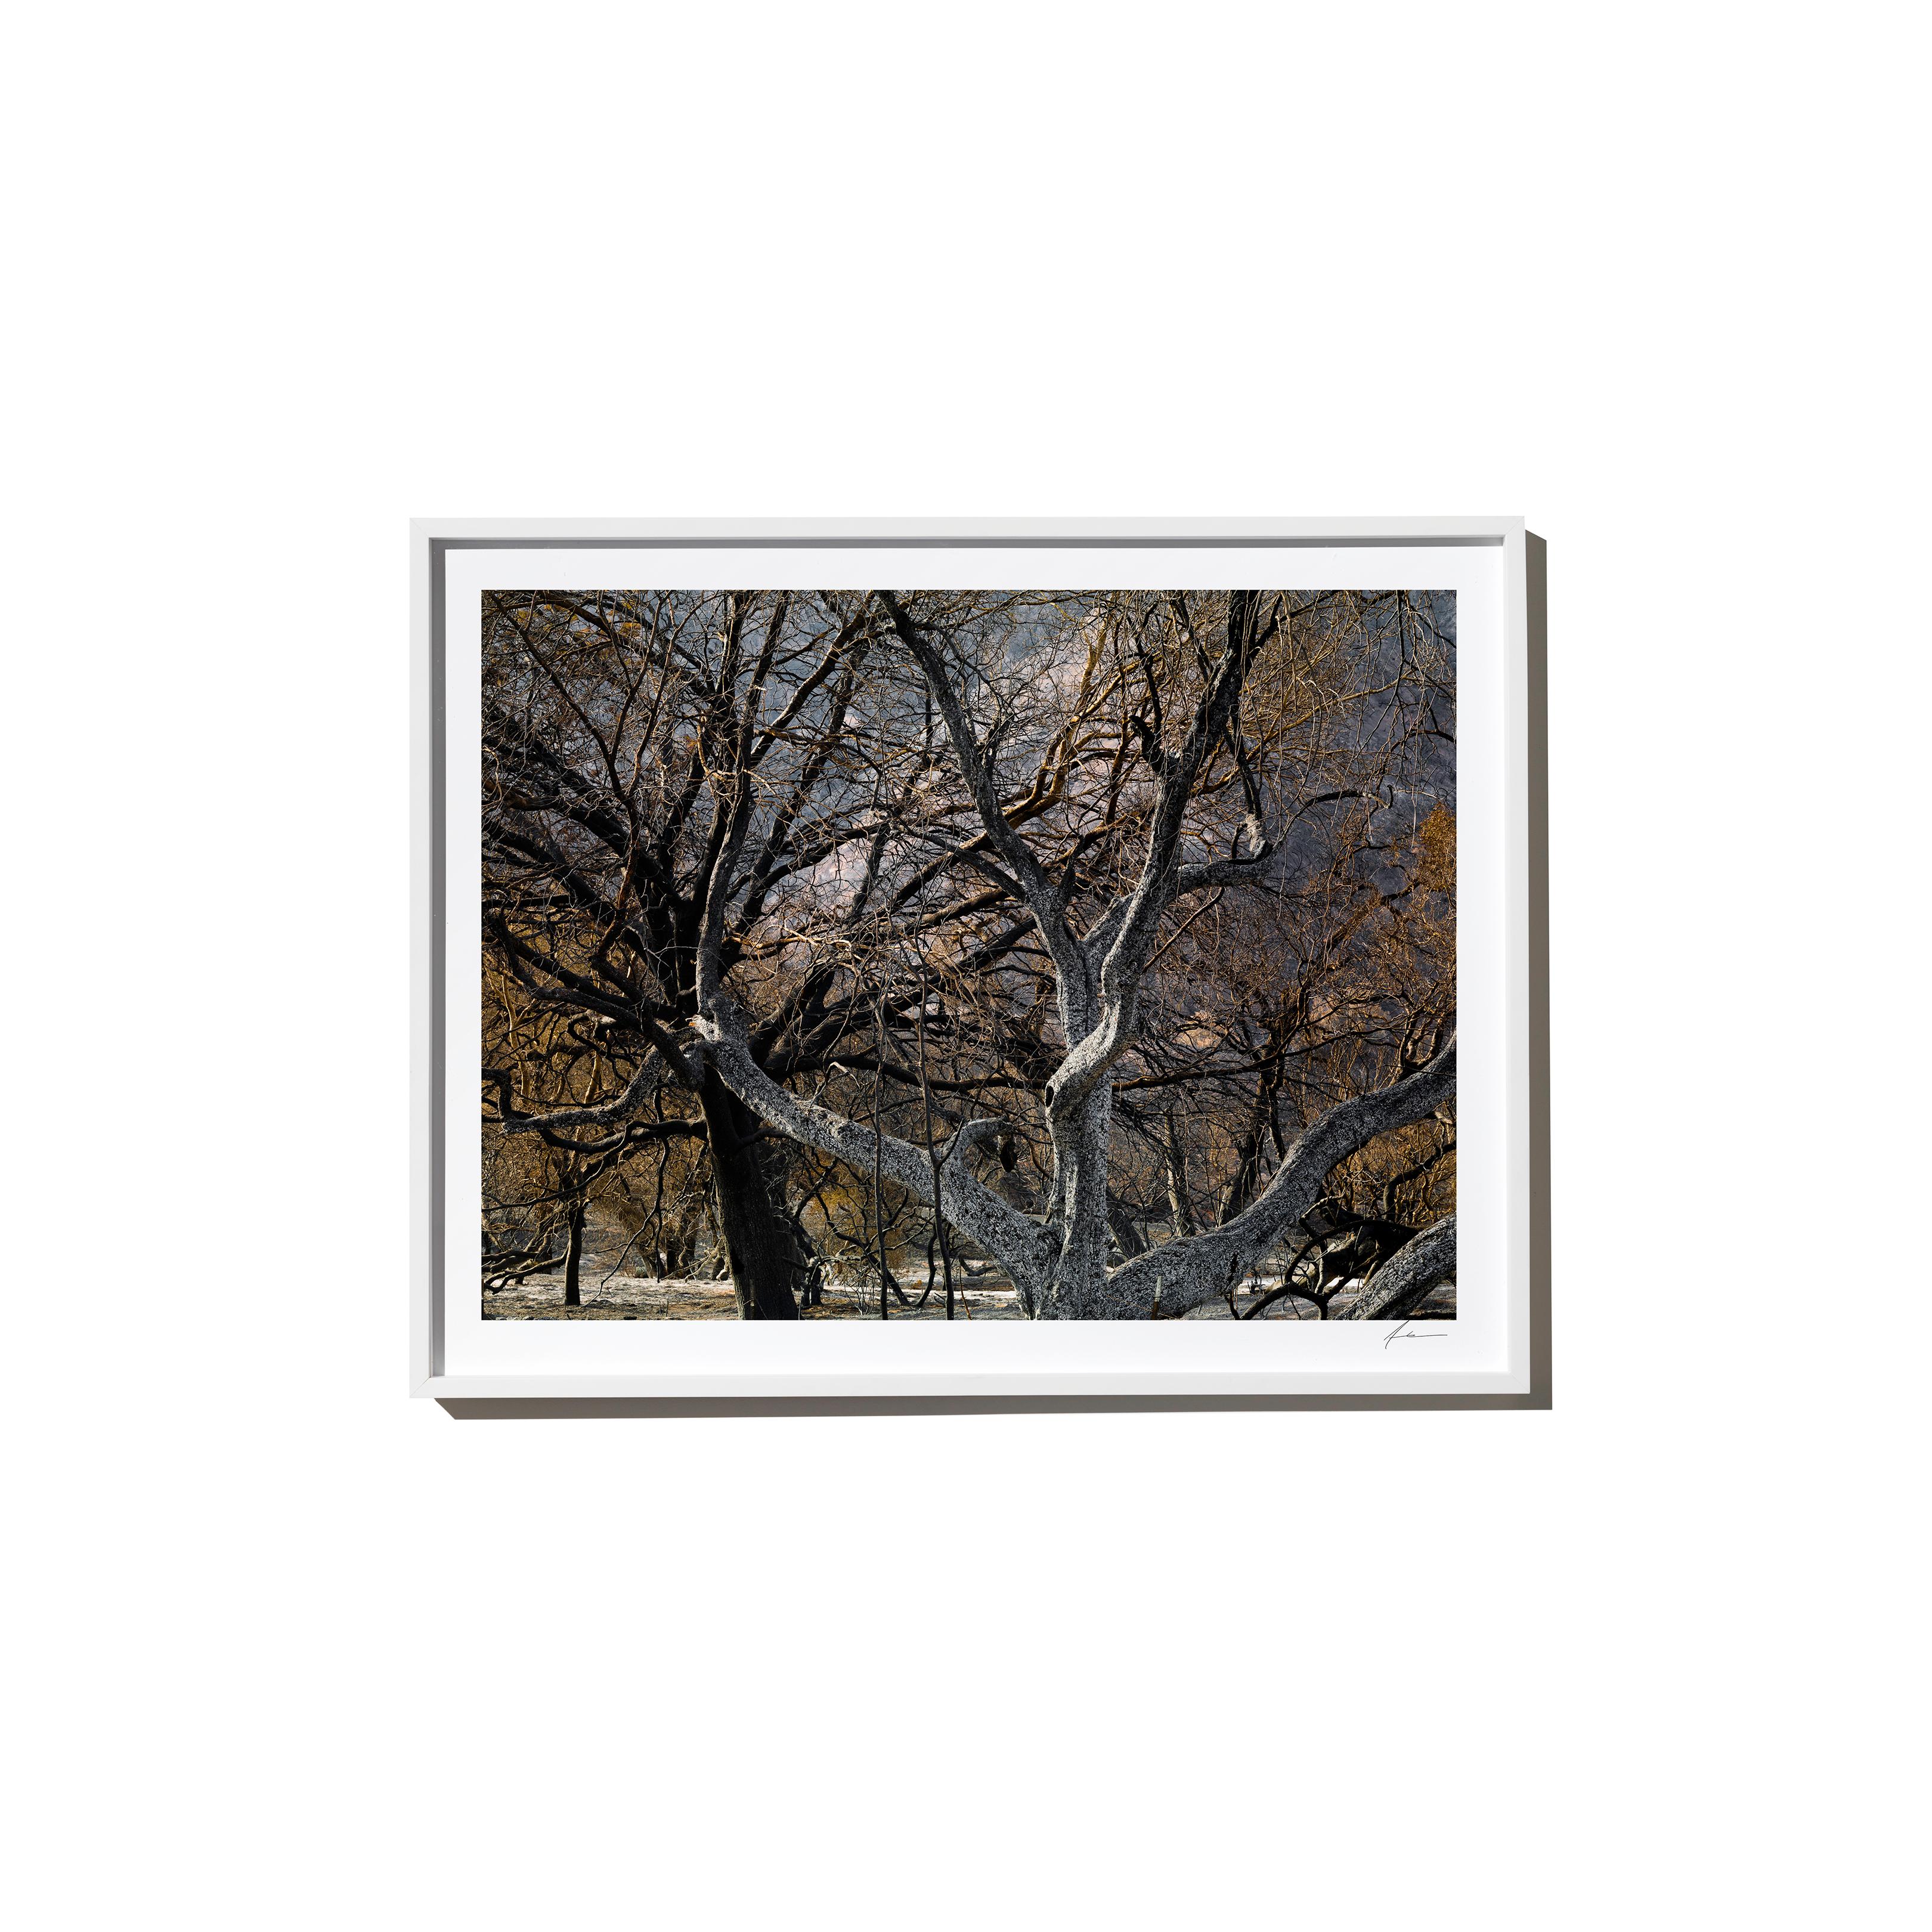 "Noir" is a framed color landscape photograph by Los Angeles-based photographer Timothy Hogan. 

Frame available in white or black, please specify on order. Please allow 15 days for production before shipping.

Editions and sizes as follows:

Small: